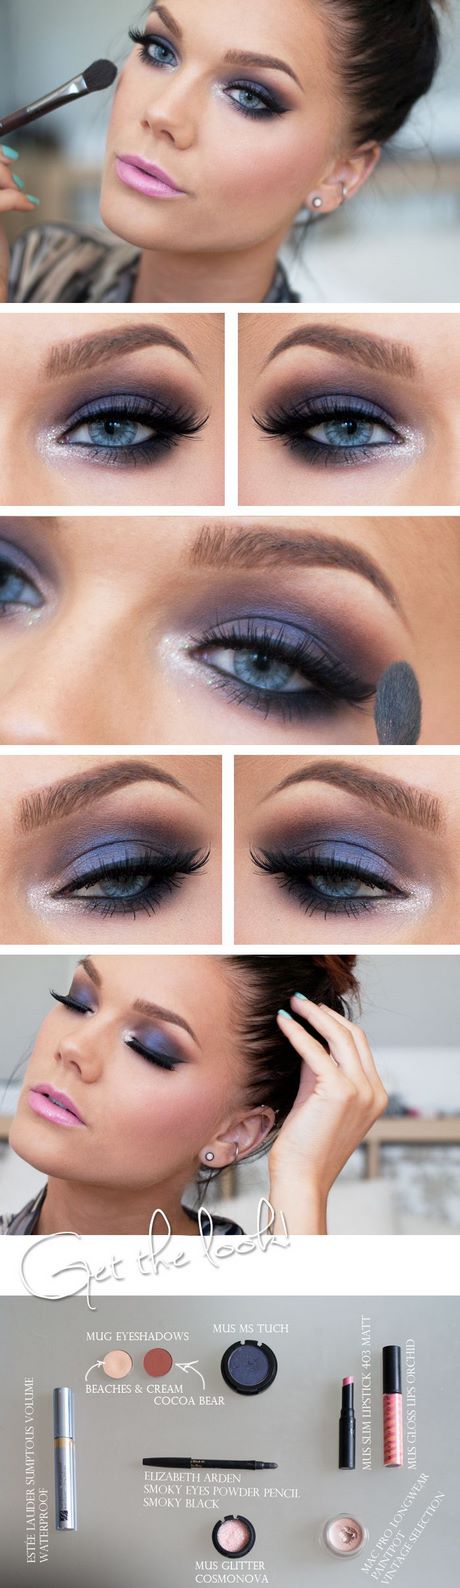 new-years-party-makeup-tutorial-23_4 New years party make-up tutorial